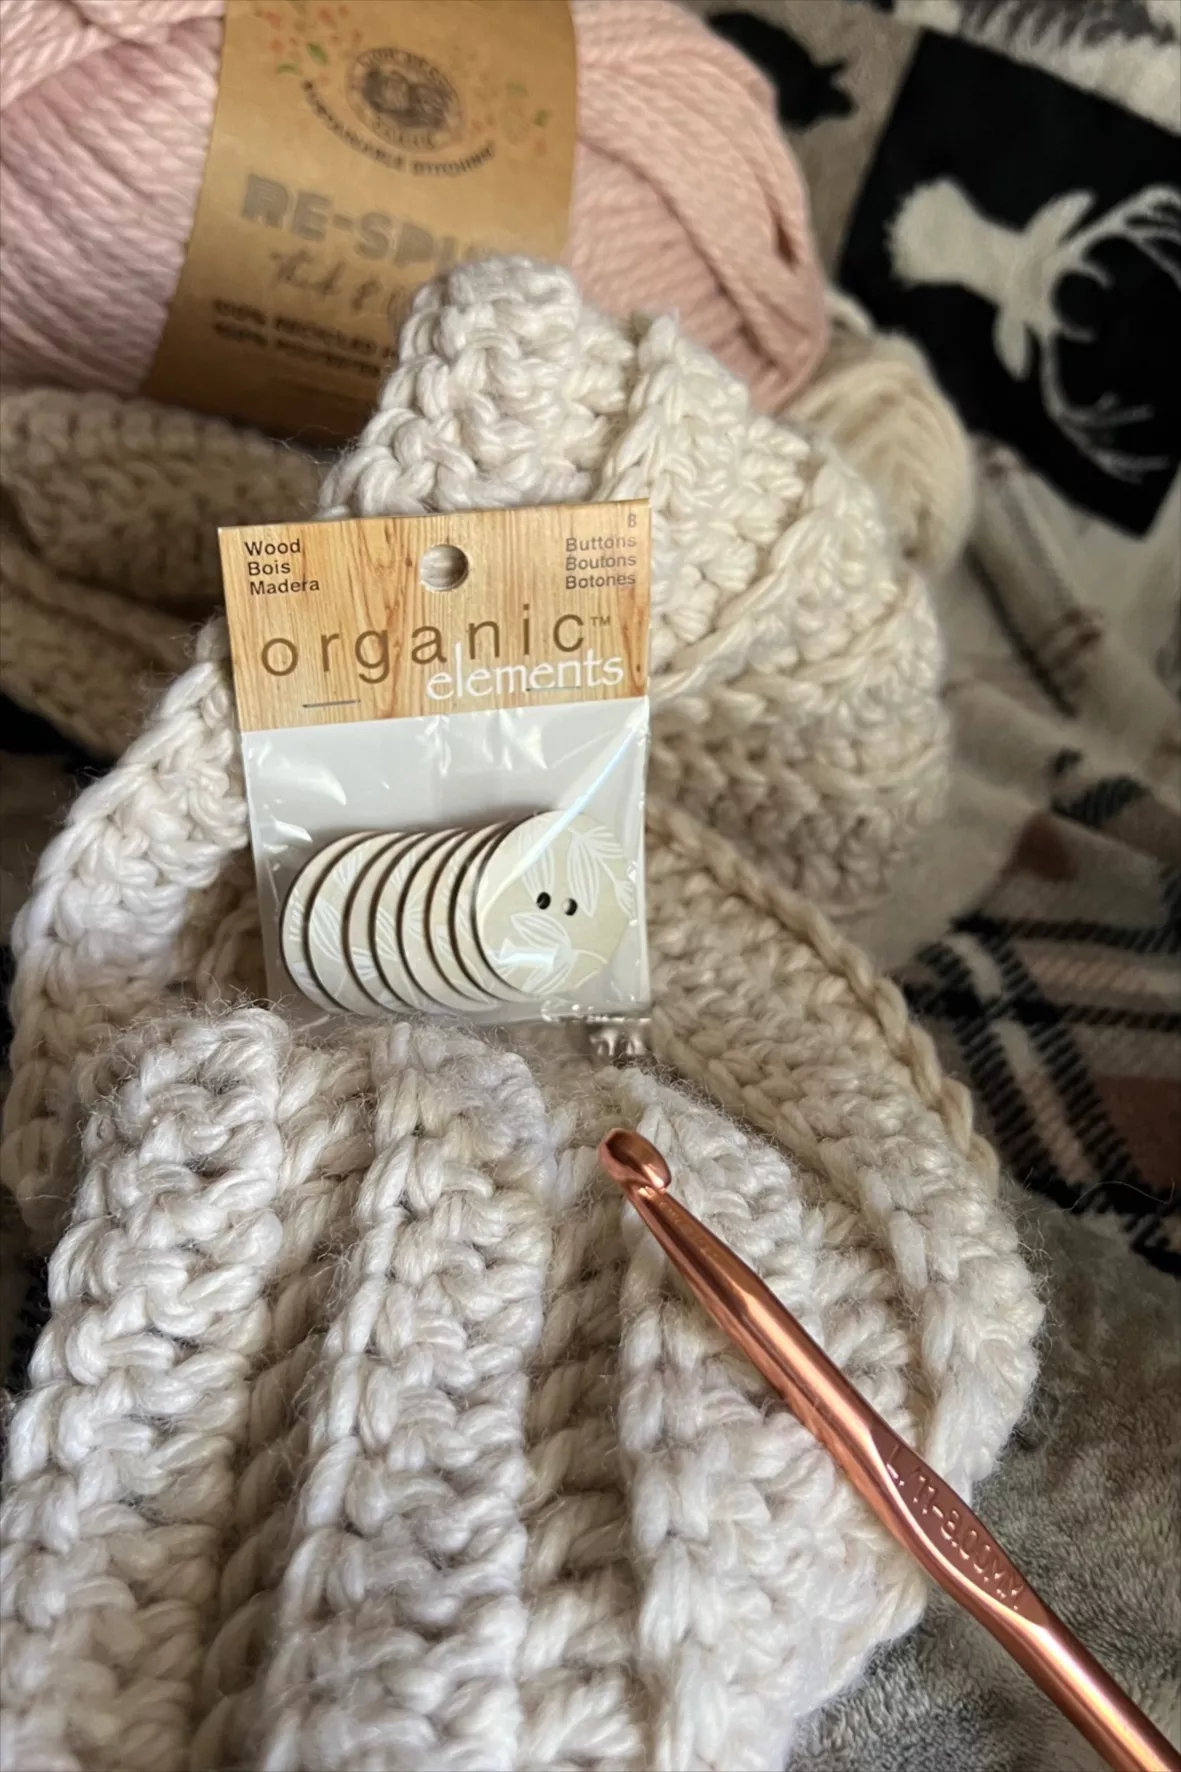 Knitting Lion Brand Wool Ease makes warm and easy care projects